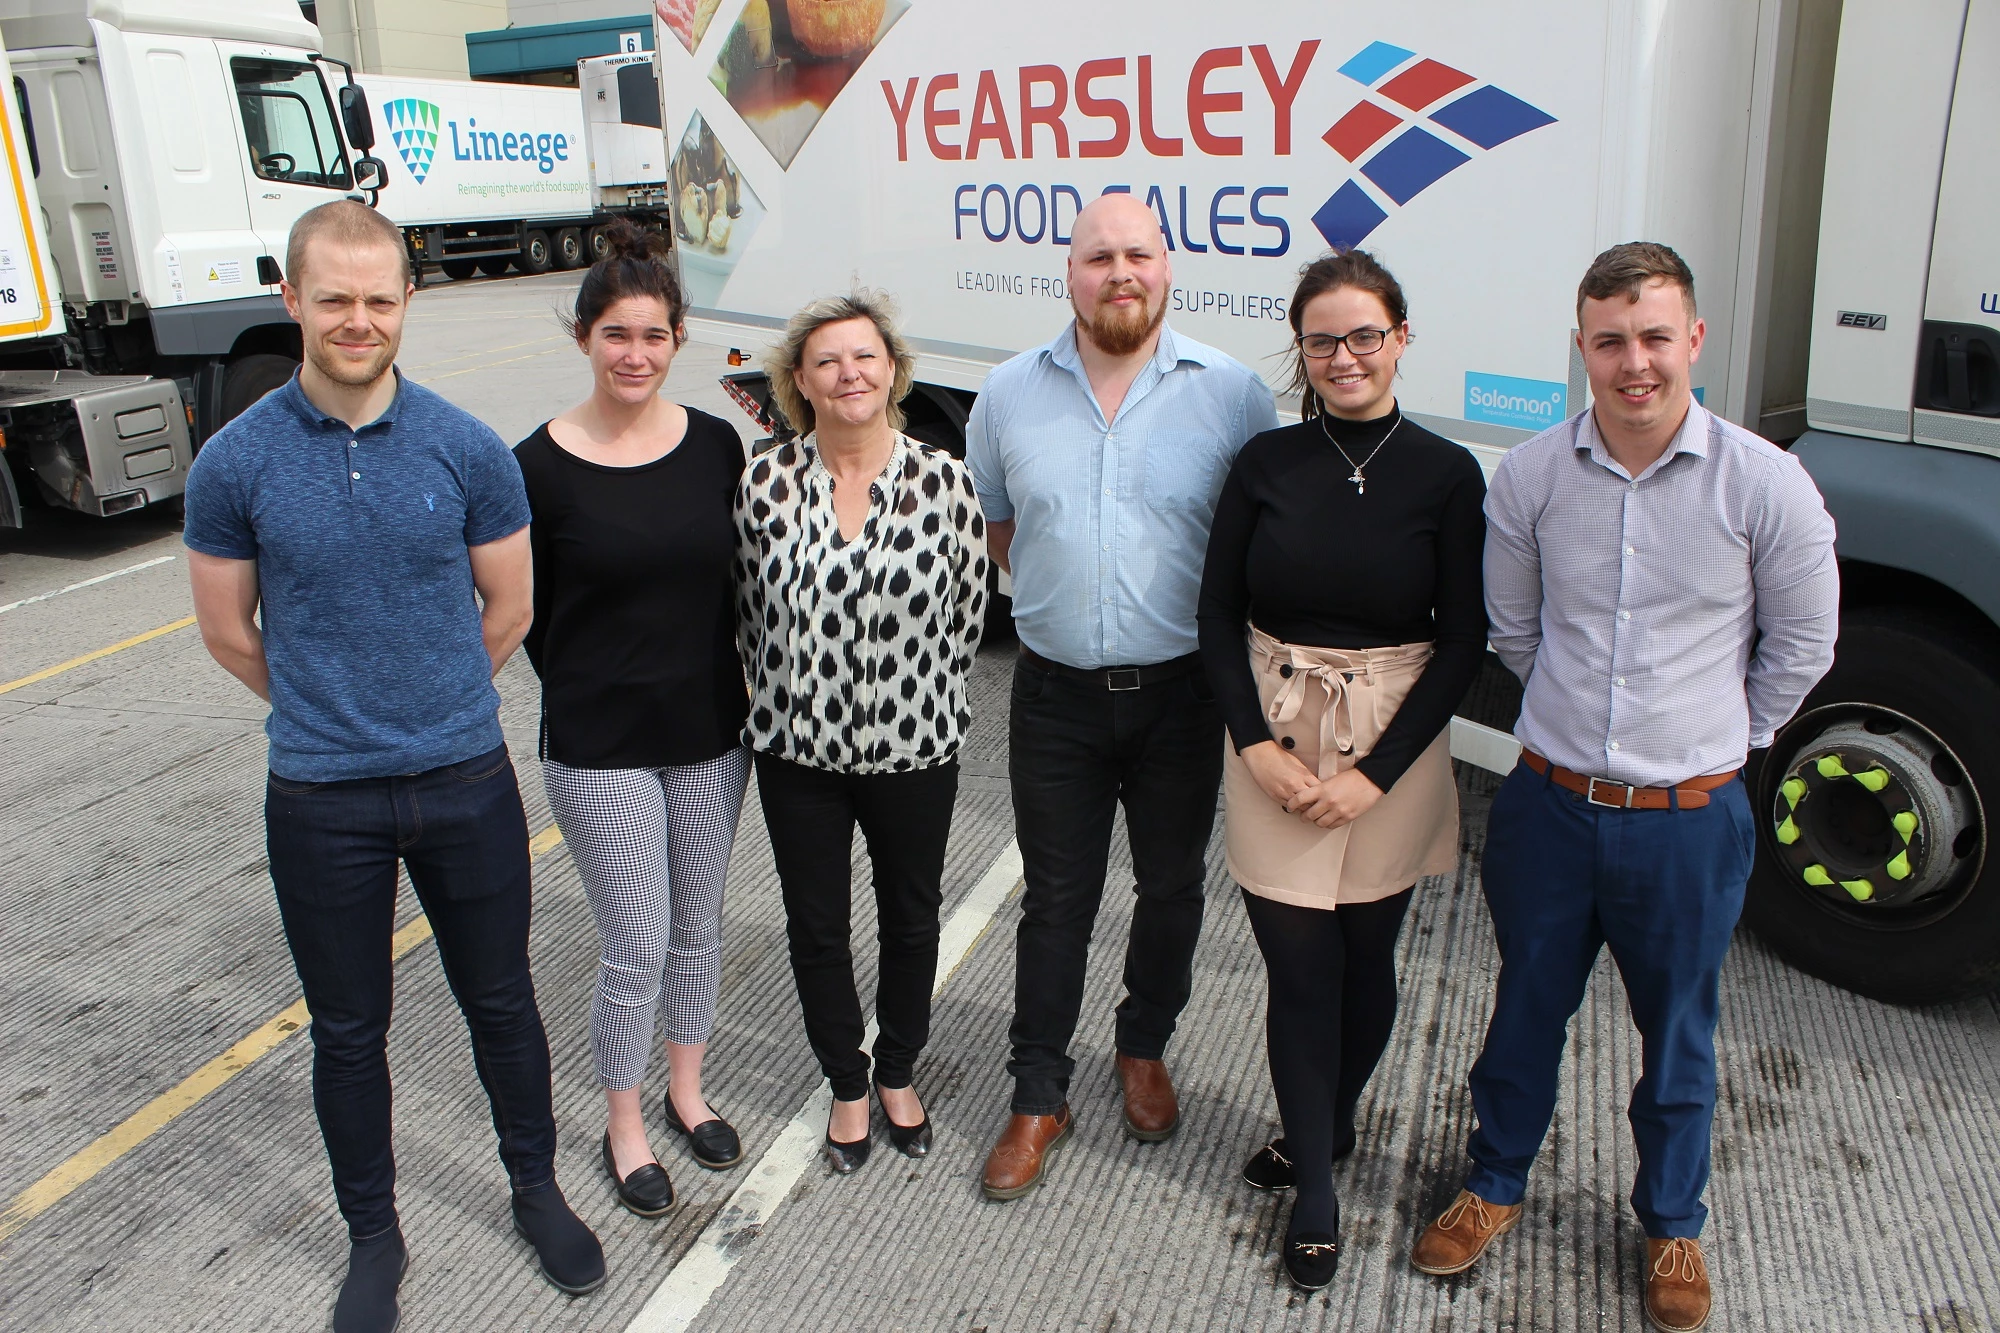 L-R Dave Williams, Katie Cullen from Yearsley Food, Kate Puc from Francis House, Elliot Leach, Chloe Marshall and Tom Scott from Yearsley Food.